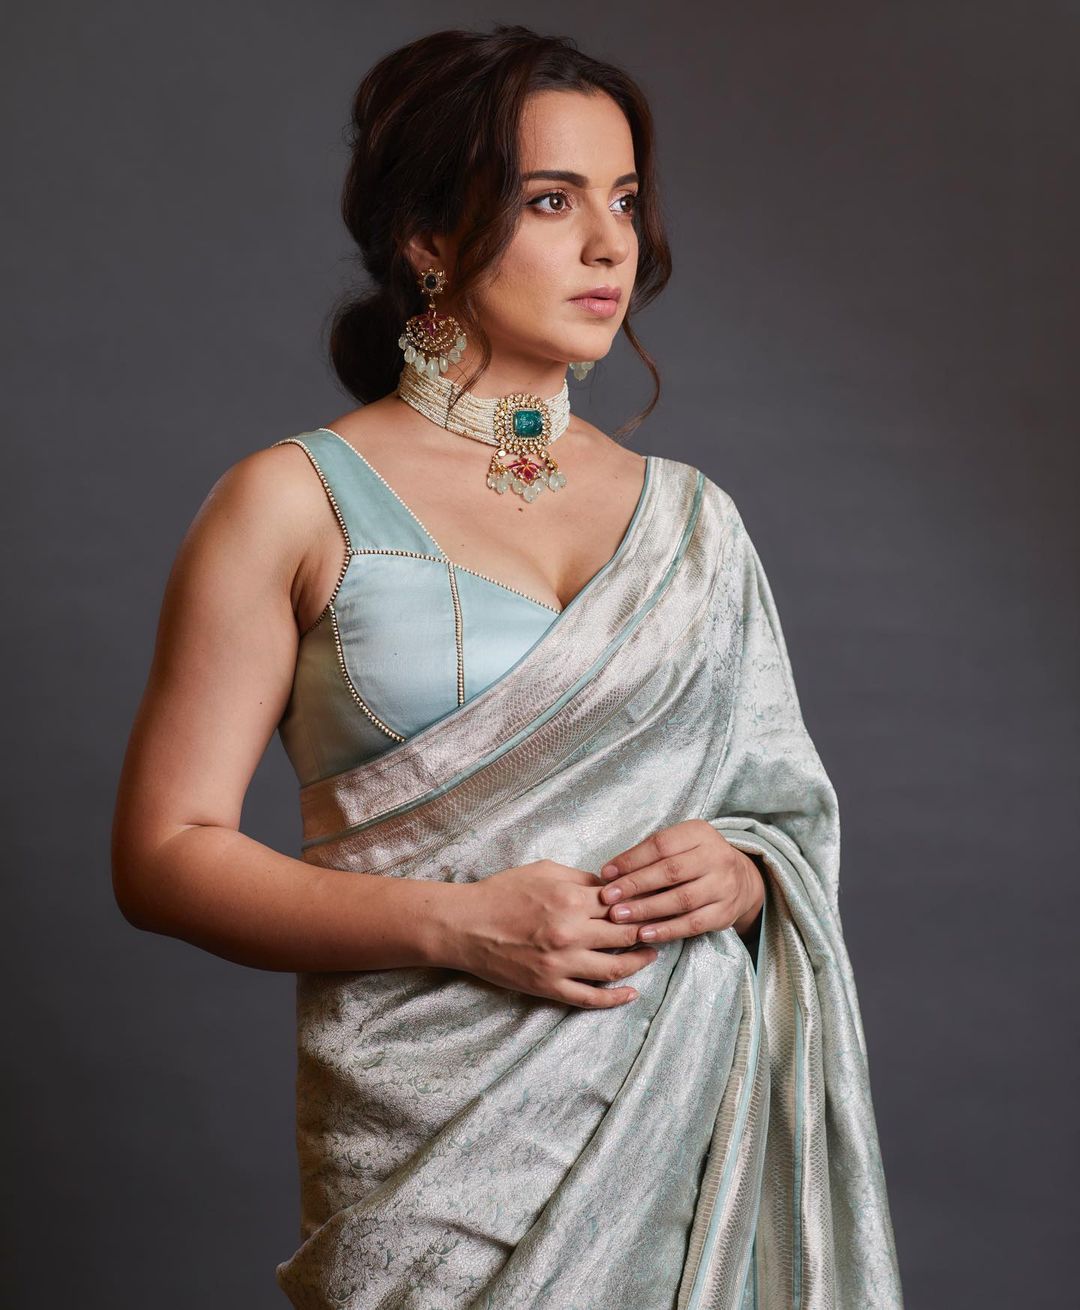 Kangana Ranaut looks regal in the pastel blue saree with the pearl choker